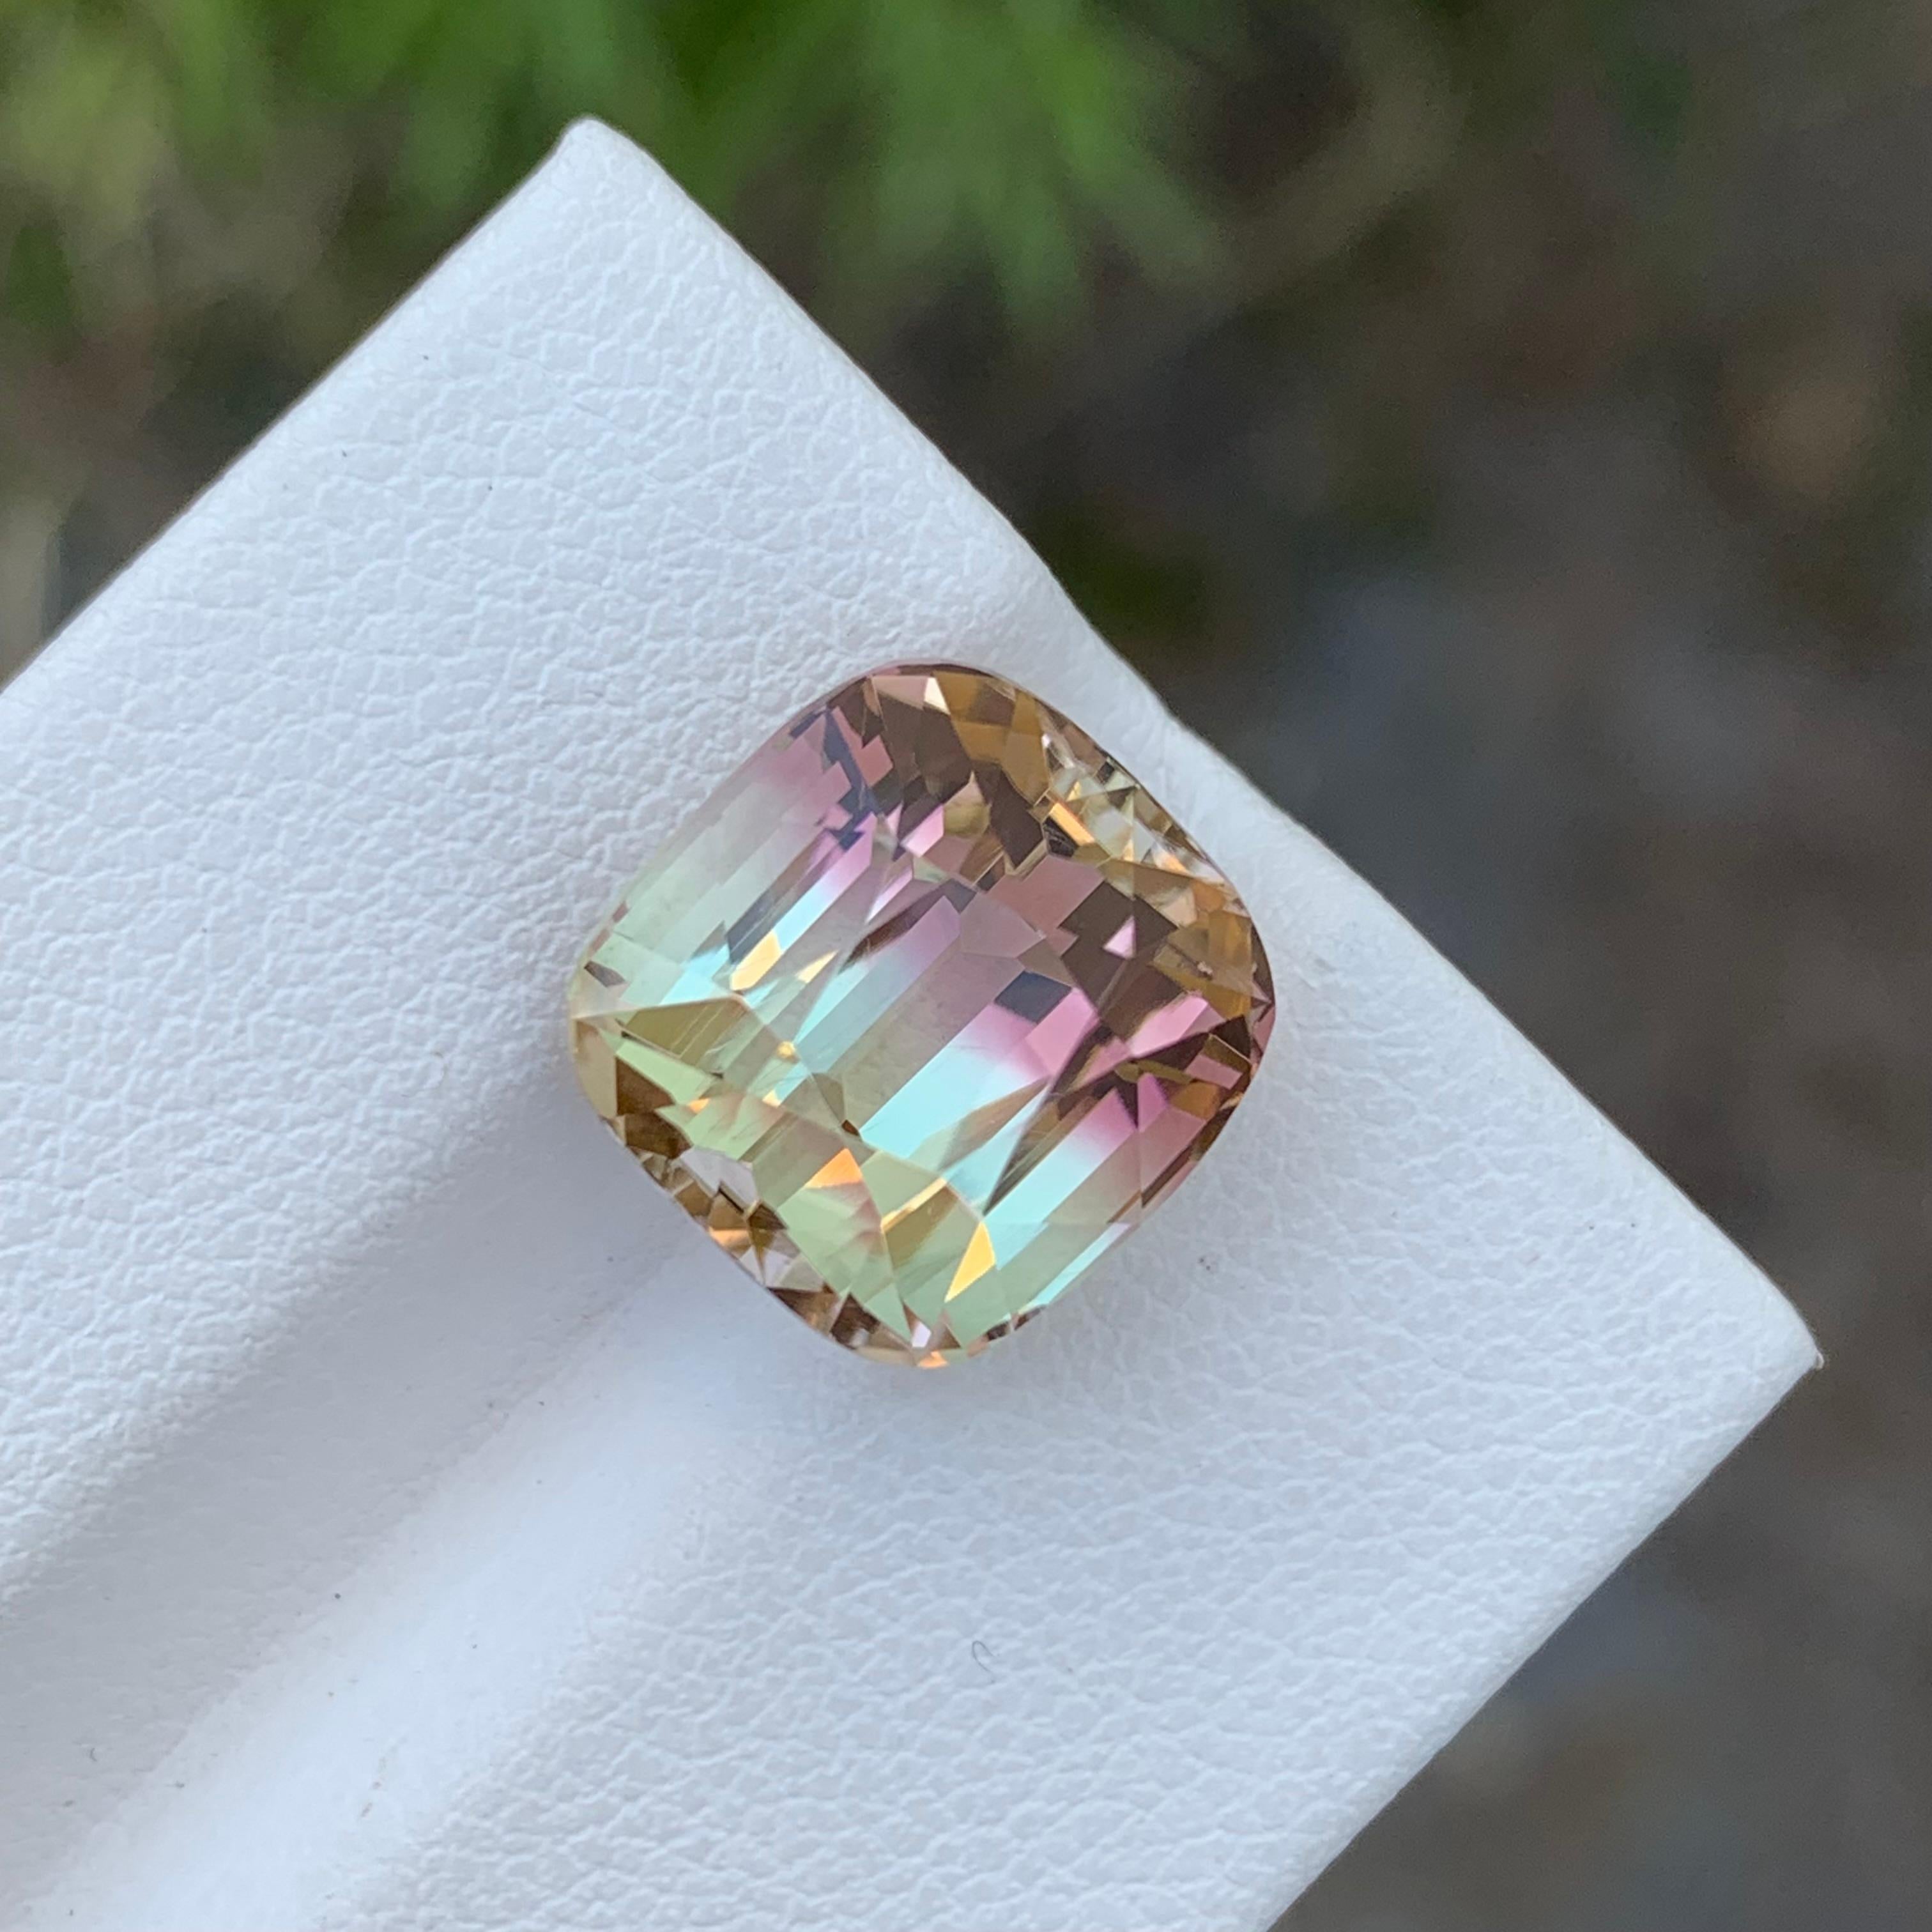 Loose Bi Colour Tourmaline

Weight: 9.95 Carats
Dimension: 11.6 x 11.4 x 9.9 Mm
Colour: Peach Pink And Mint Green
Origin: Afghanistan
Certificate: On Demand
Treatment: Non

Tourmaline is a captivating gemstone known for its remarkable variety of